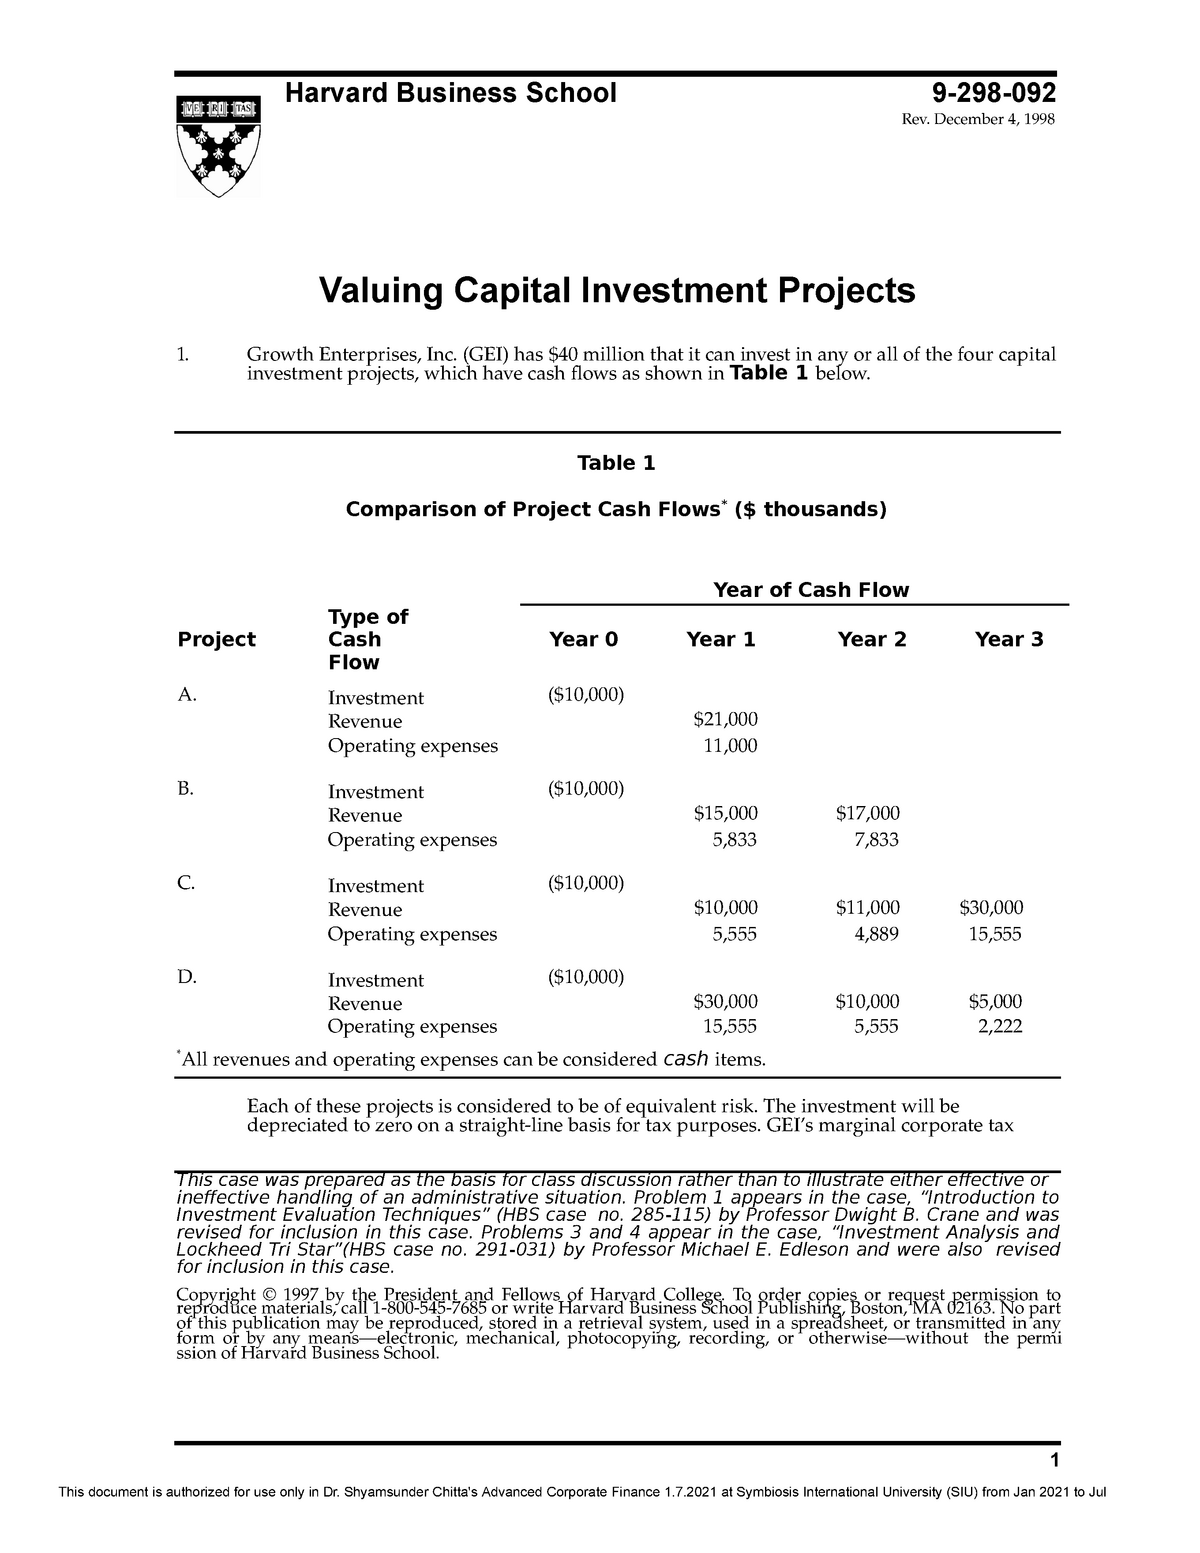 valuing capital investment projects case analysis